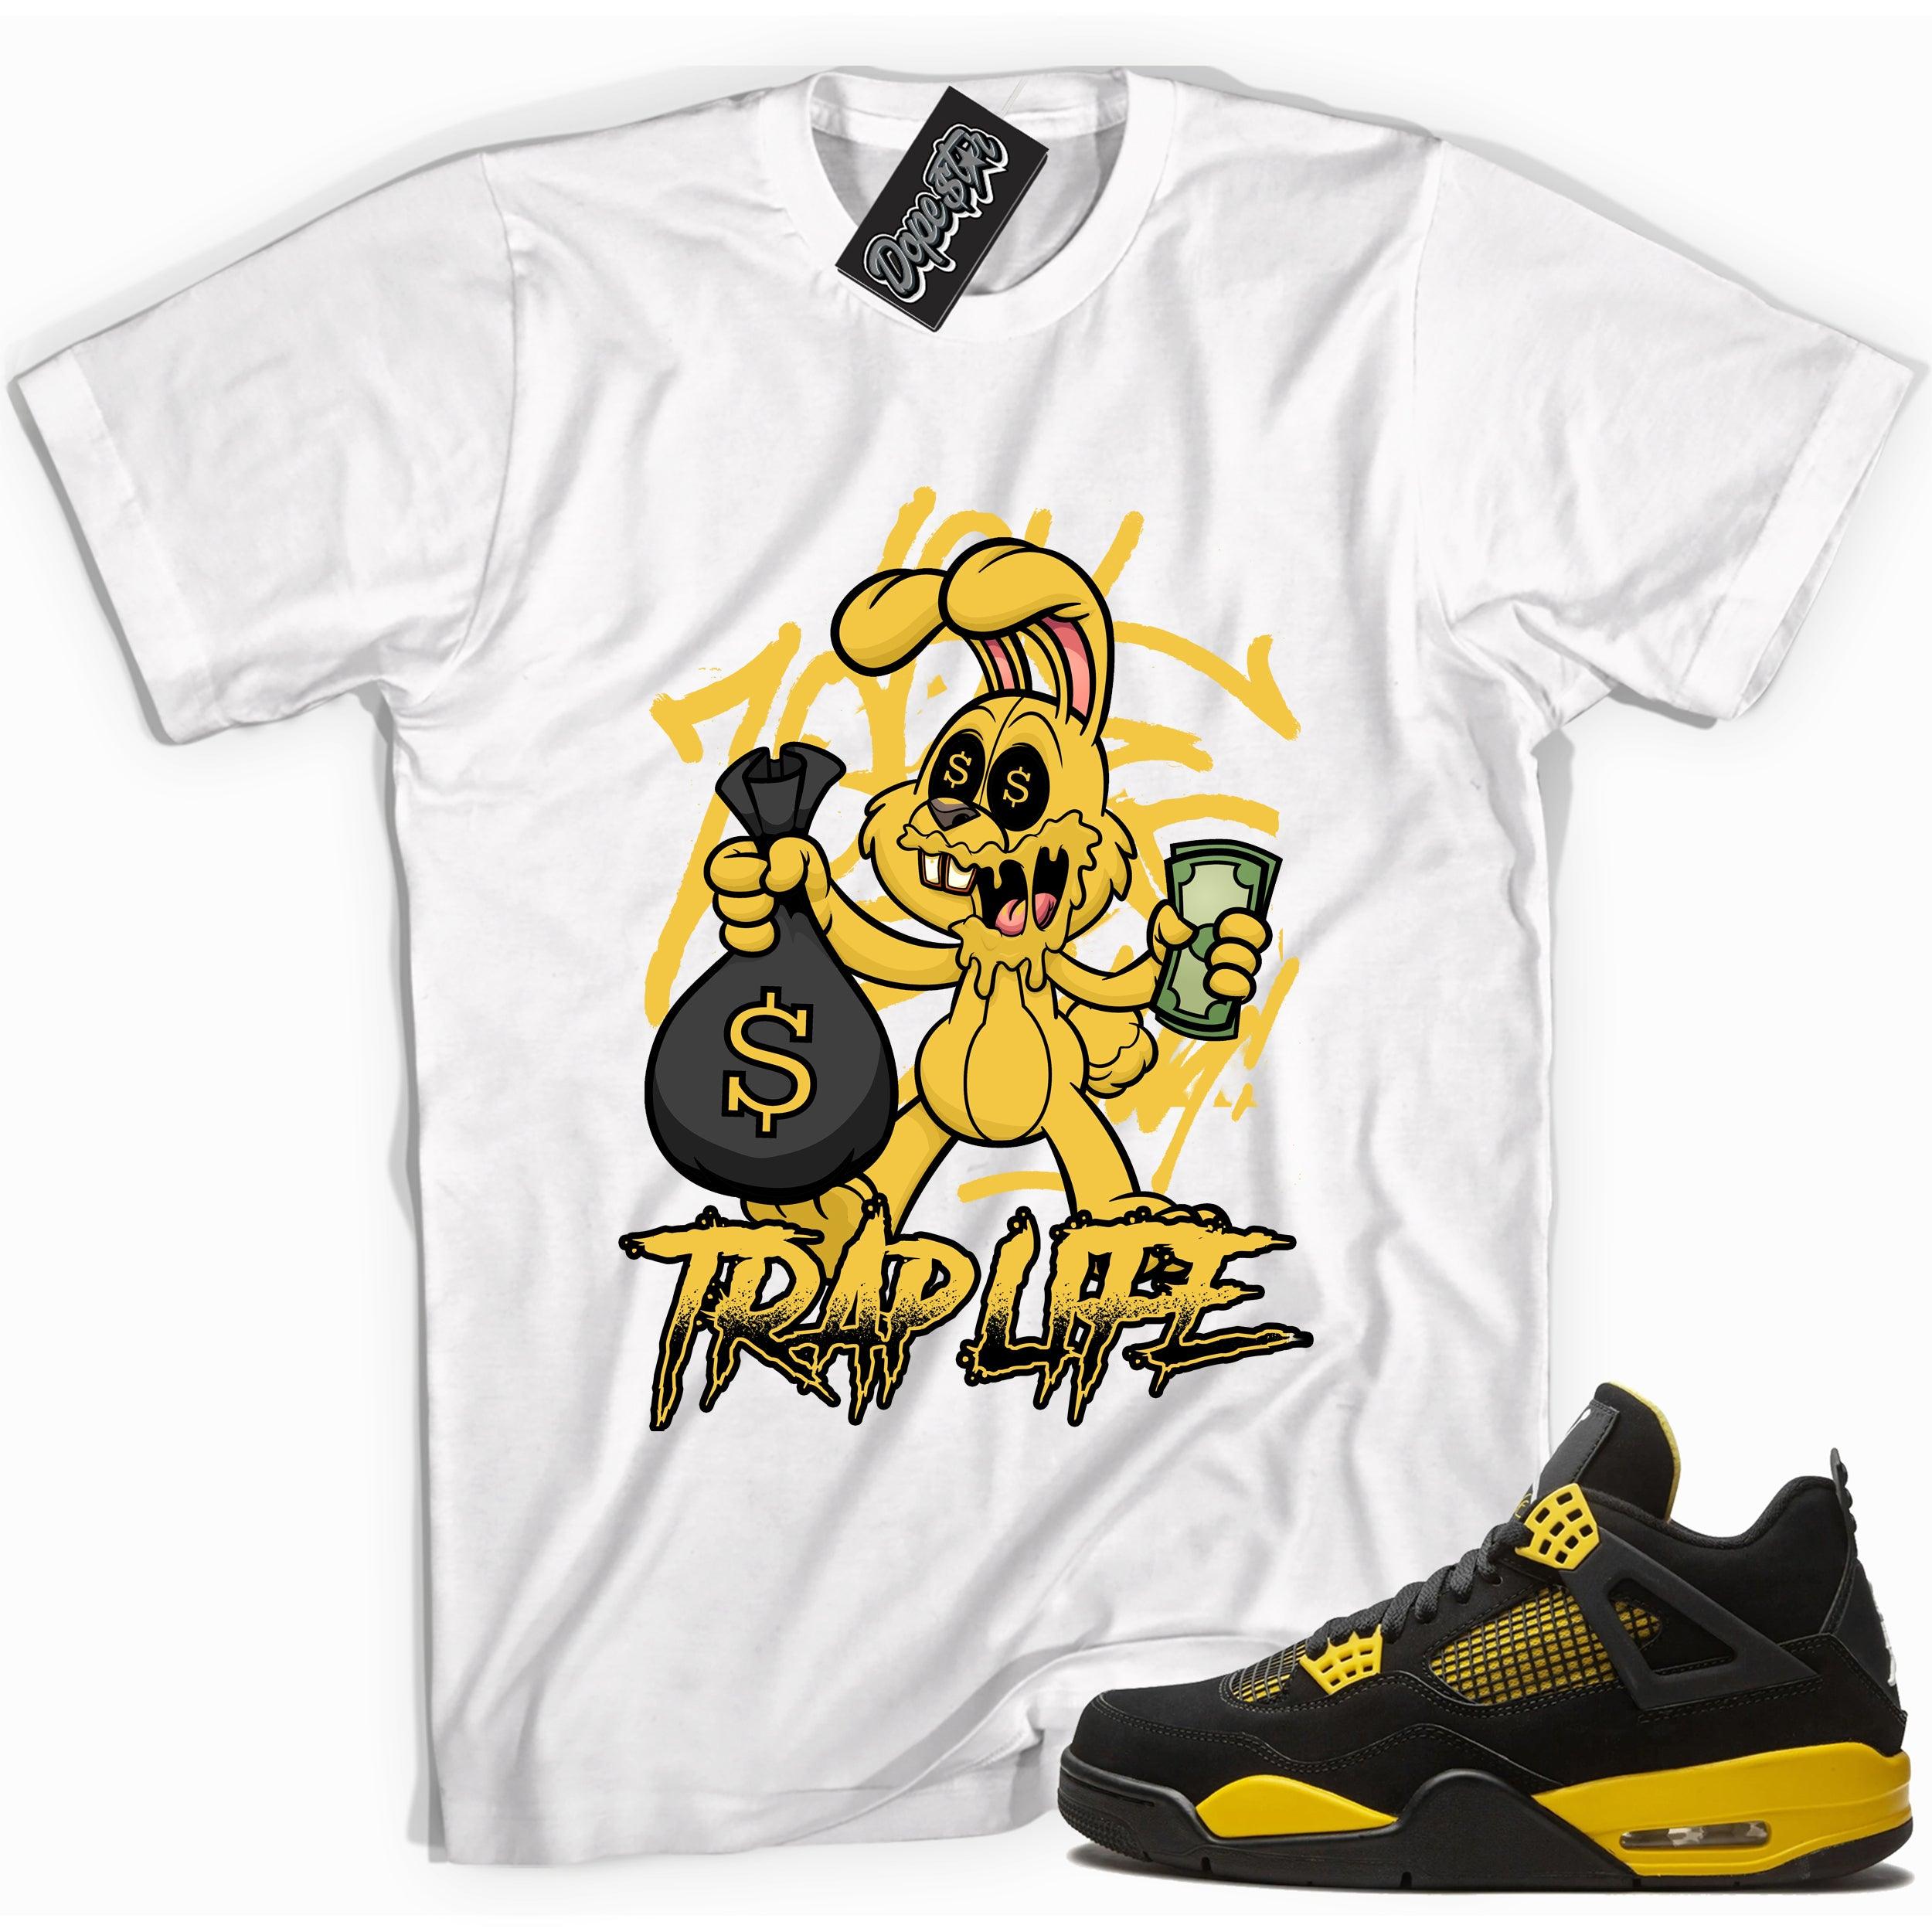 Cool white graphic tee with 'trap rabbit' print, that perfectly matches Air Jordan 4 Thunder sneakers